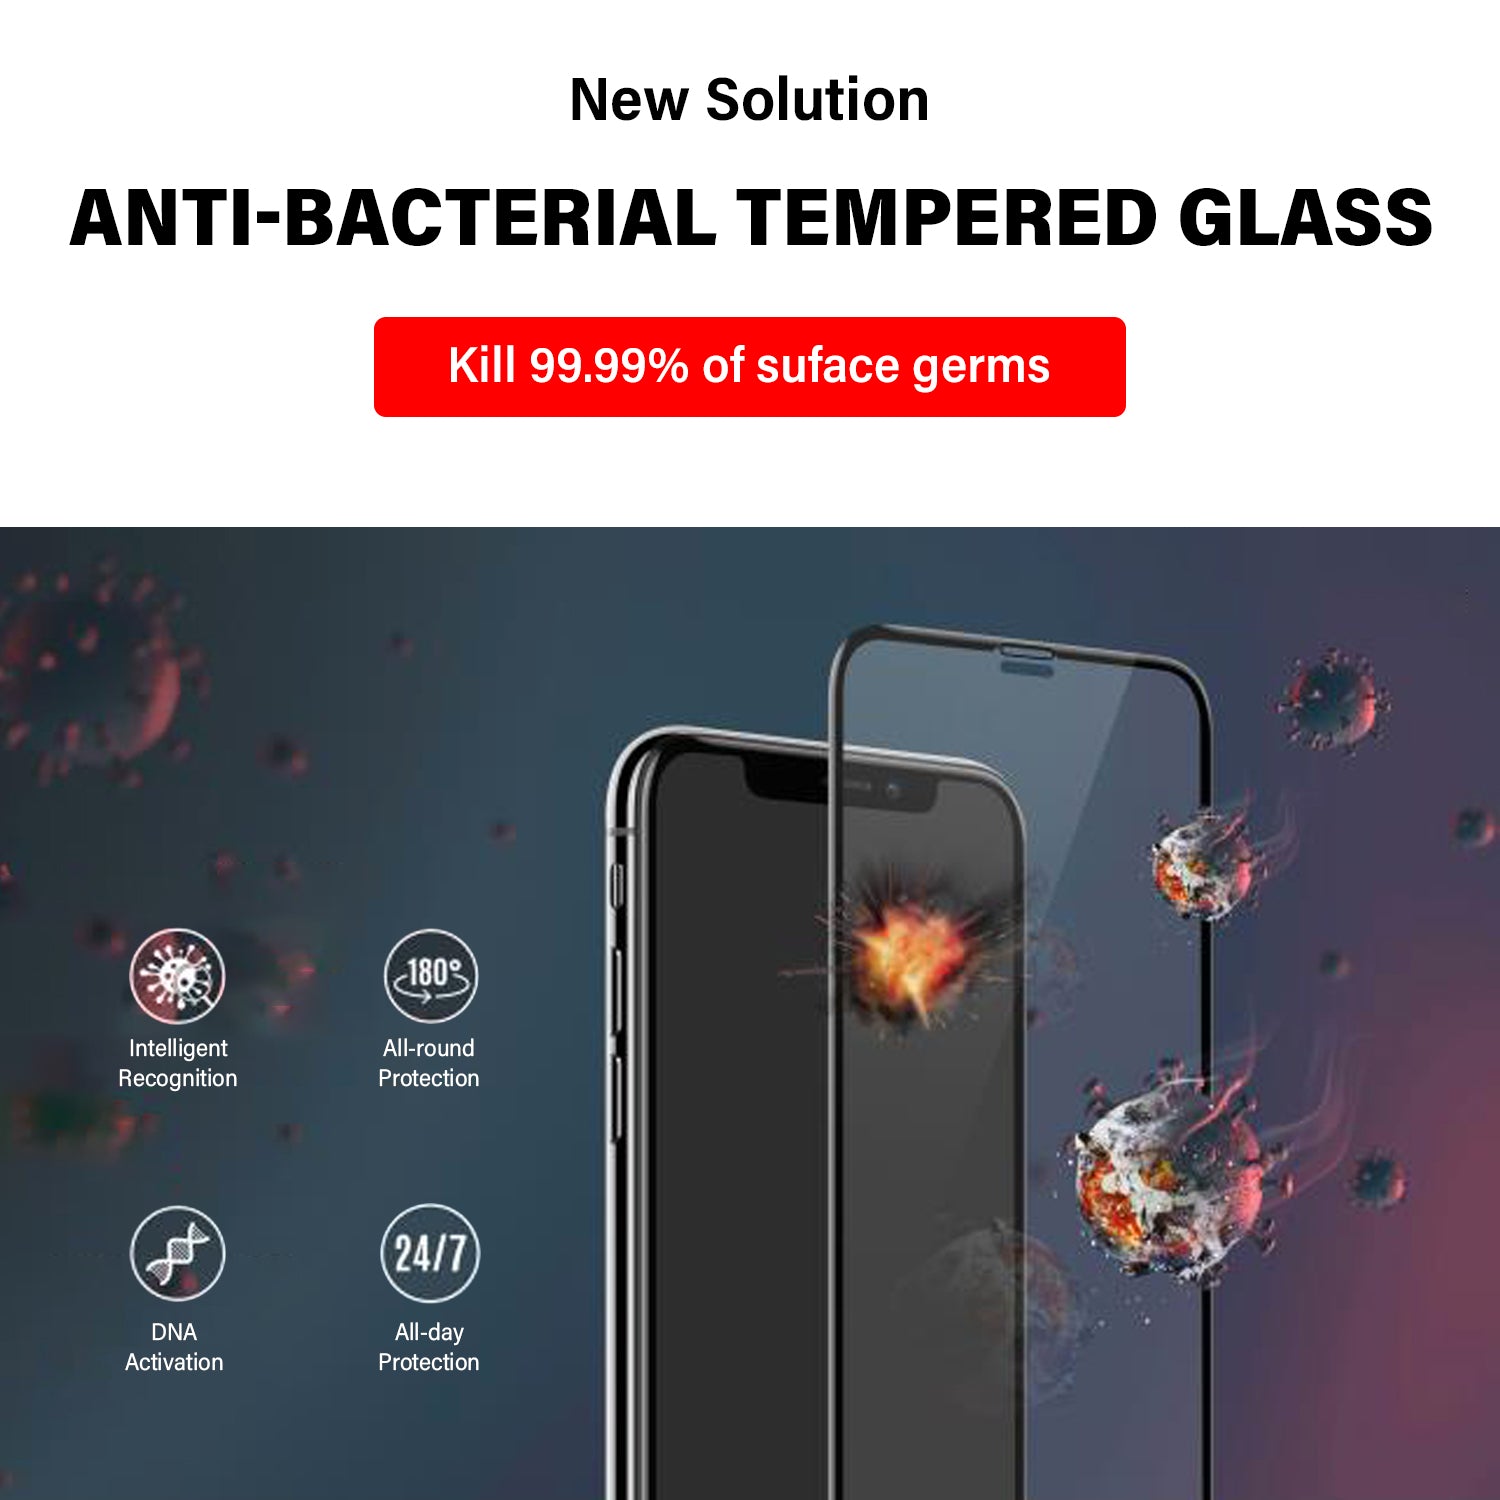 Tough on iPhone 11 Pro Tempered Glass Screen Protector Antibacterial